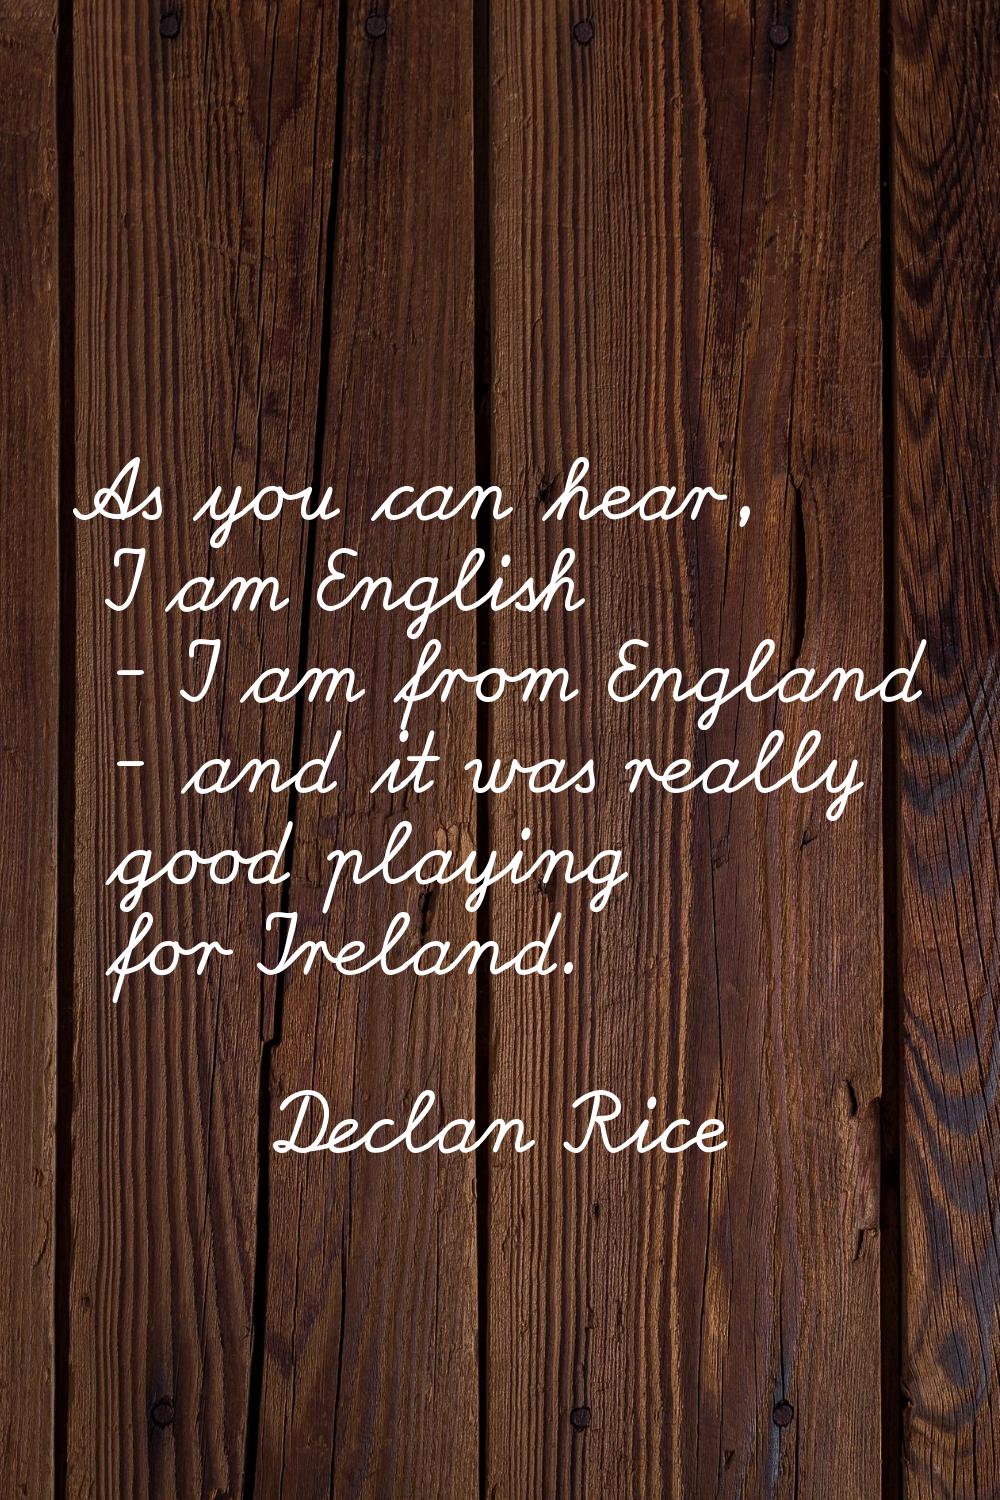 As you can hear, I am English - I am from England - and it was really good playing for Ireland.